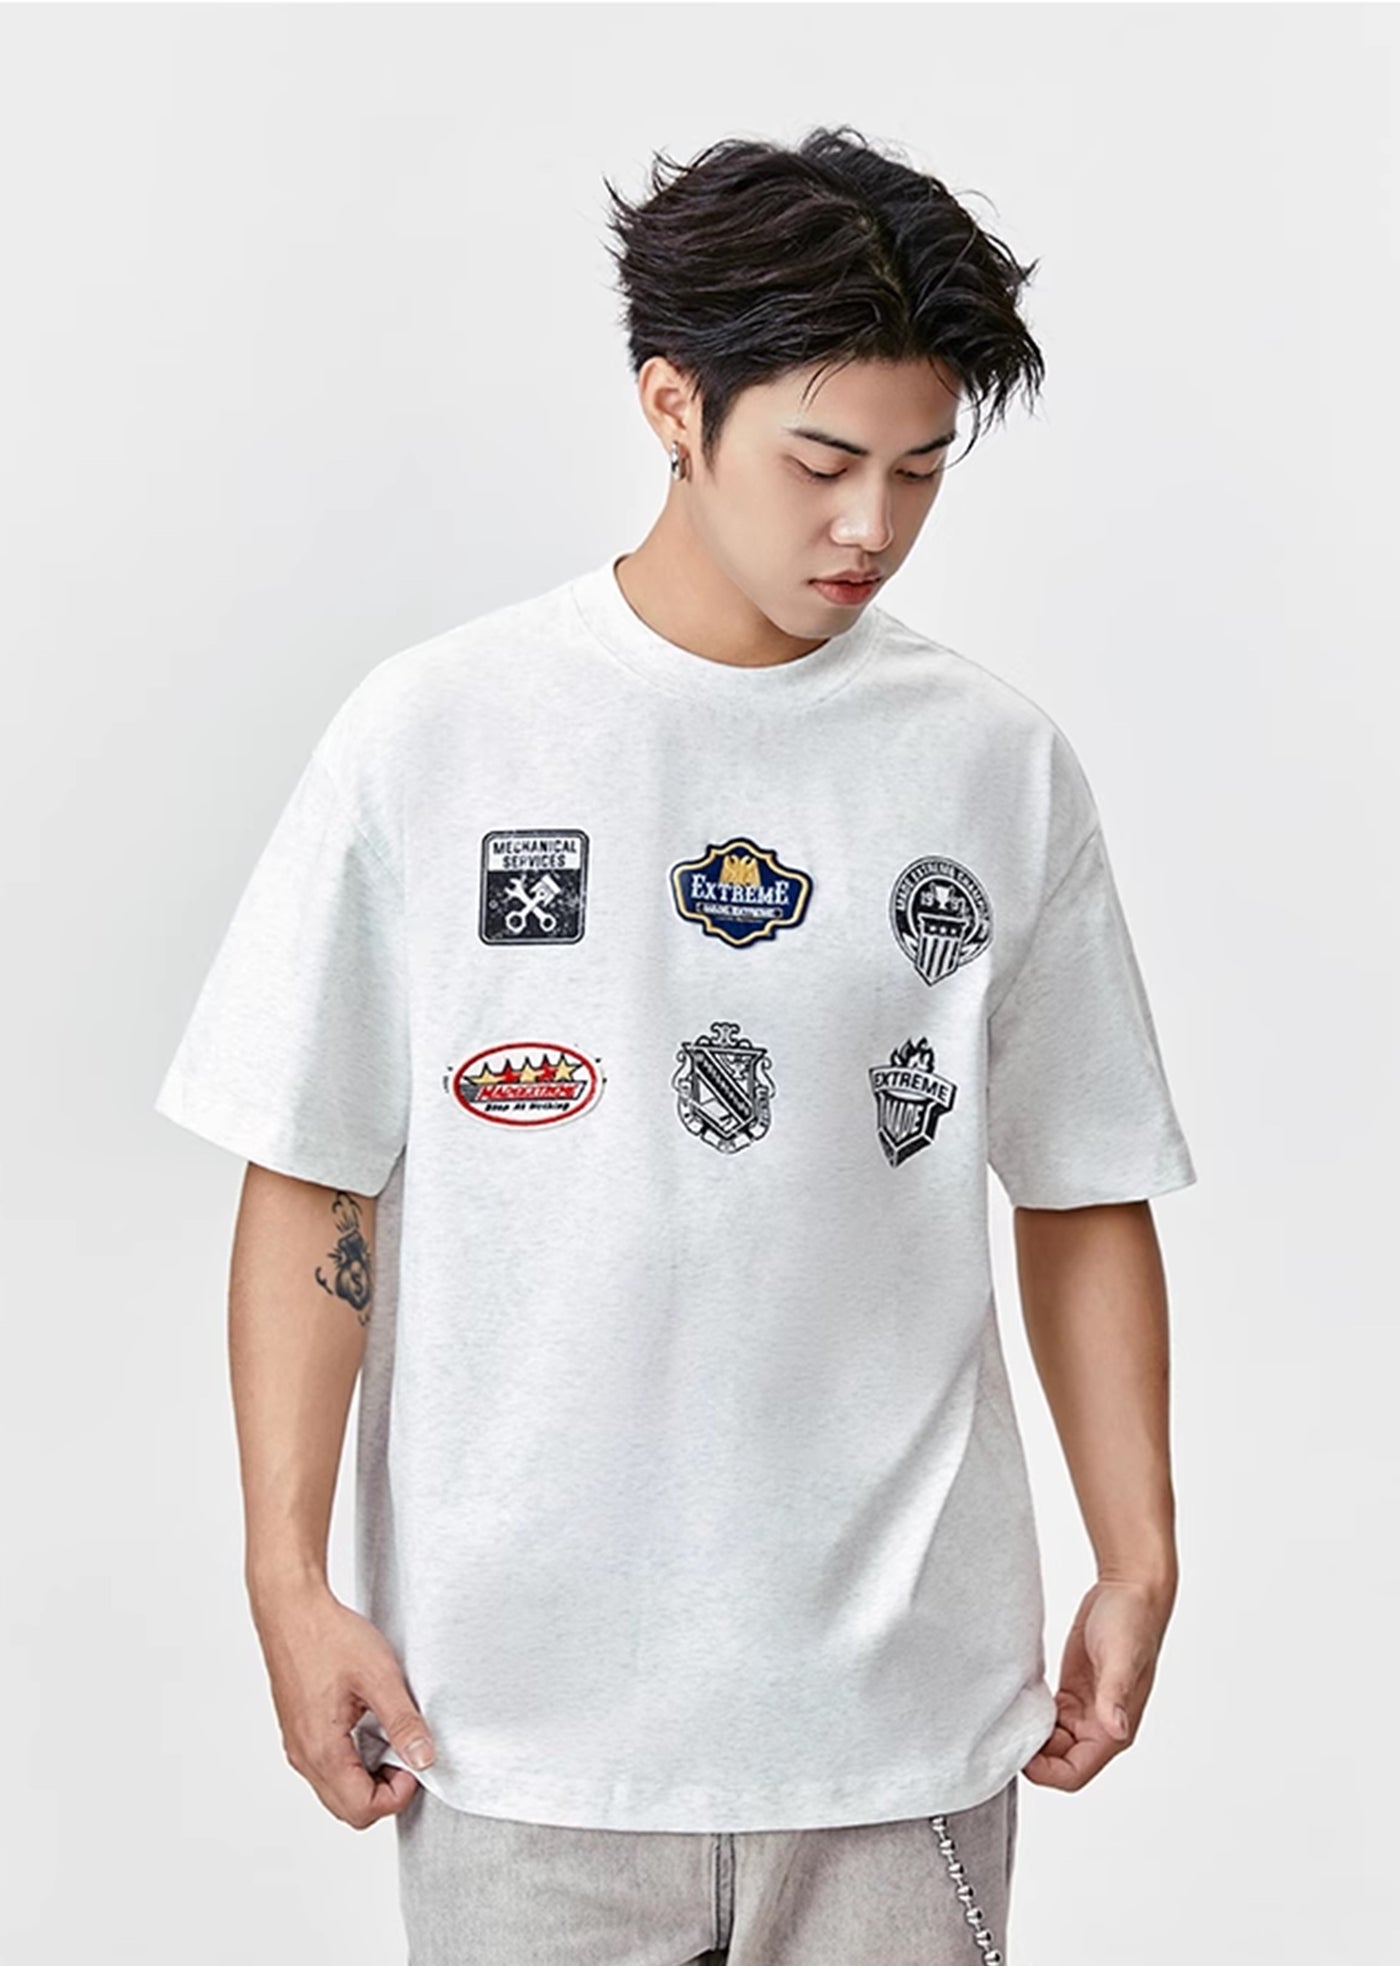 【MADEEXTREME】Multi-initial logo front design short-sleeved T-shirt  MT0001